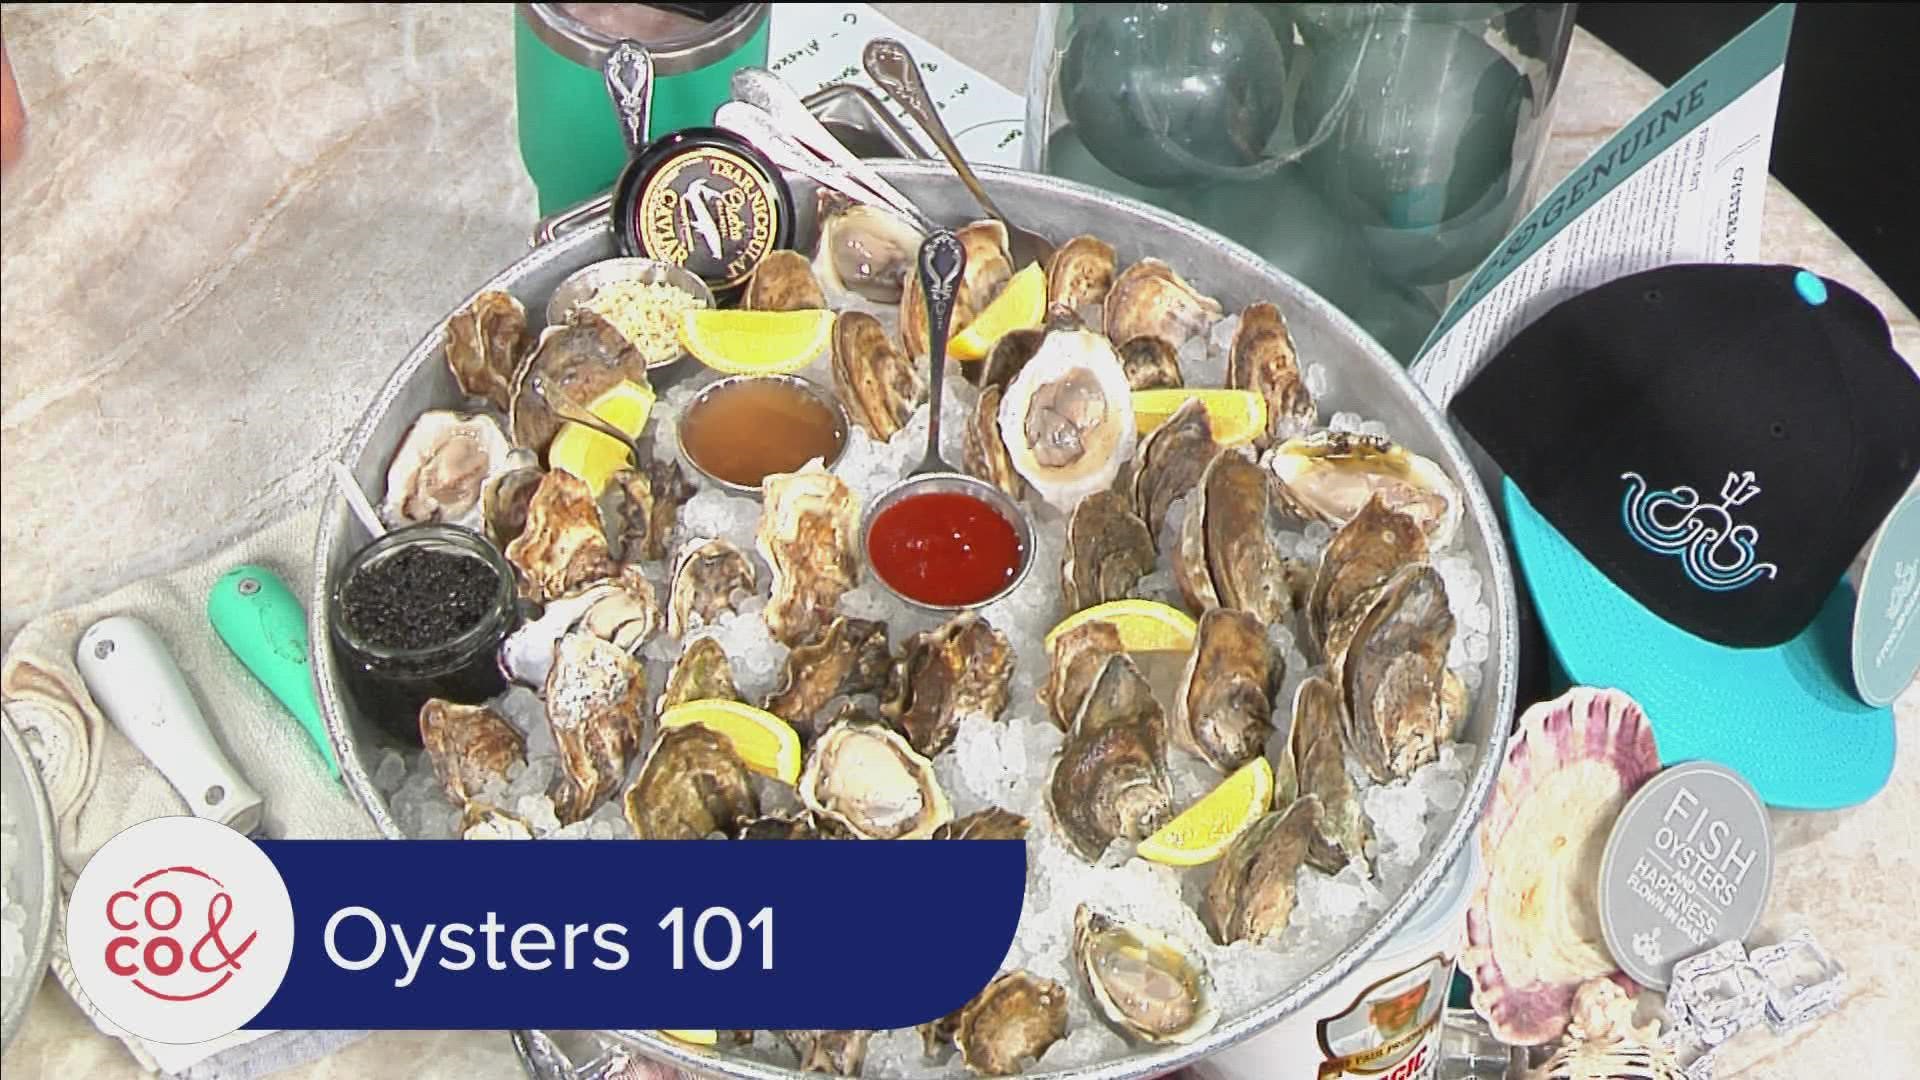 Love 'em or hate 'em, oysters are king, because August 5 is National Oyster Day! Crafted Concepts Restaurants culinary director Tim Kuklinski shows us how to shuck.